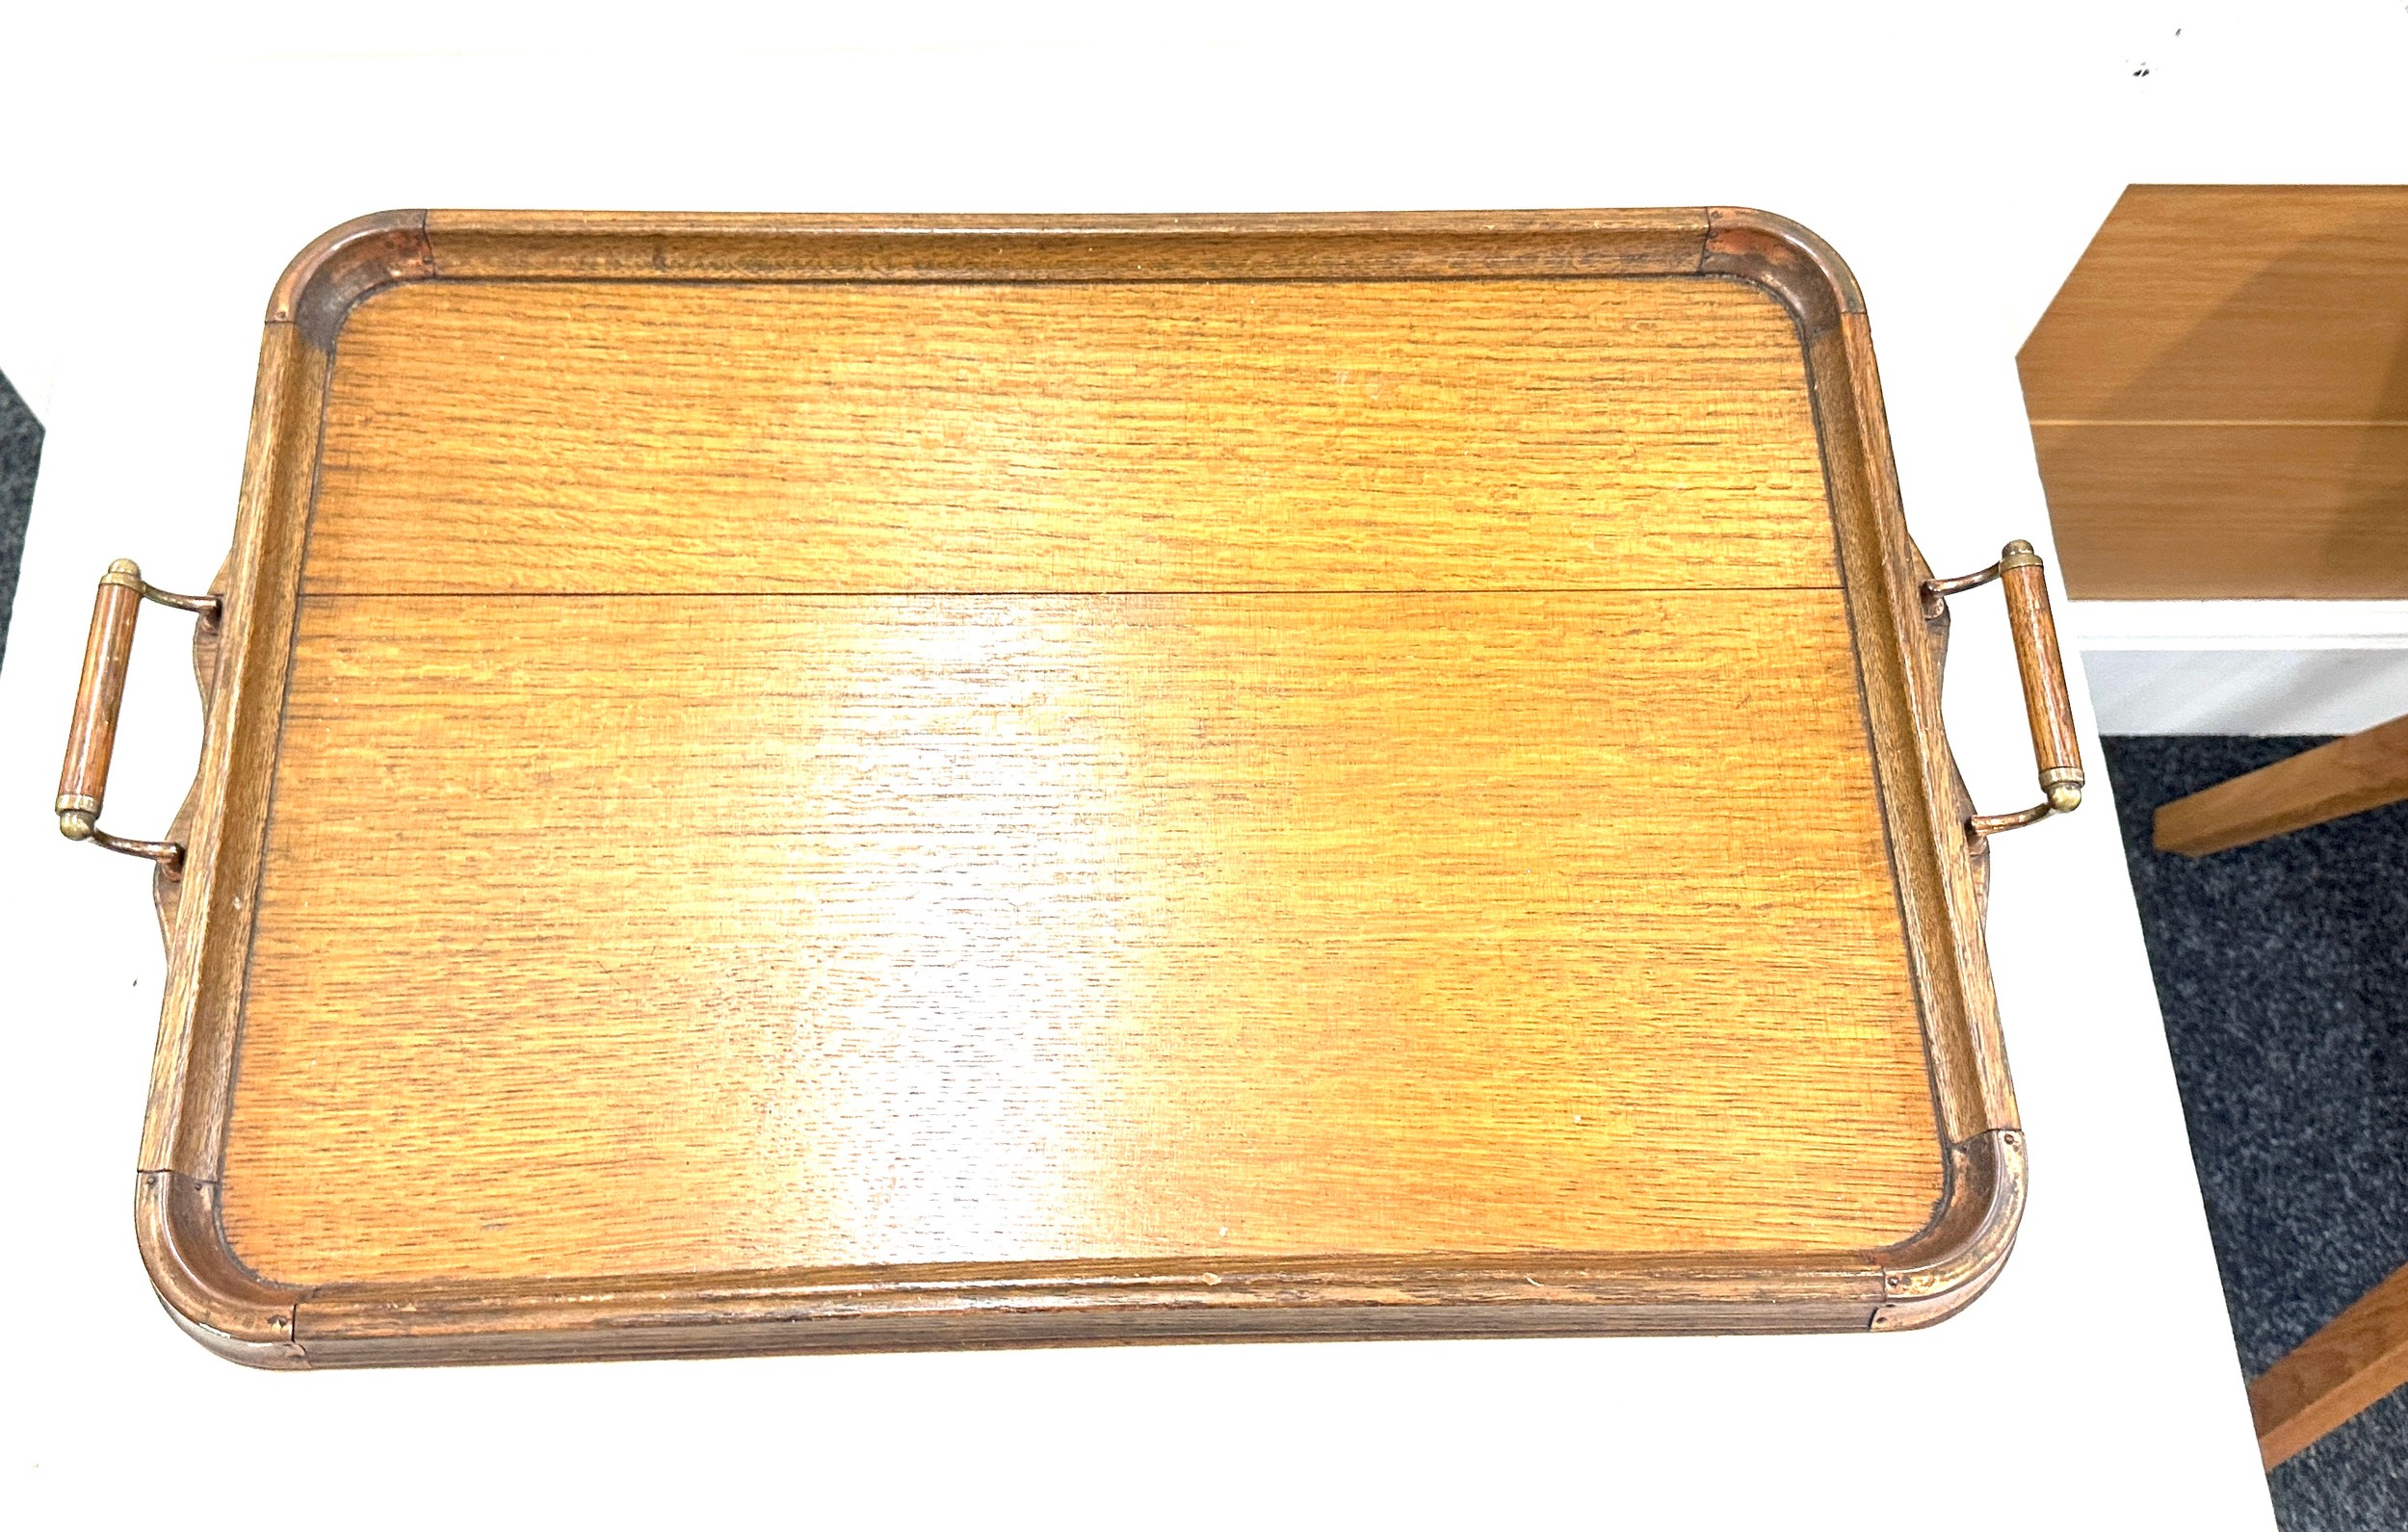 Antique 2 handled copper bound serving tray 23 inches wide by 16.5 inches - Image 3 of 3